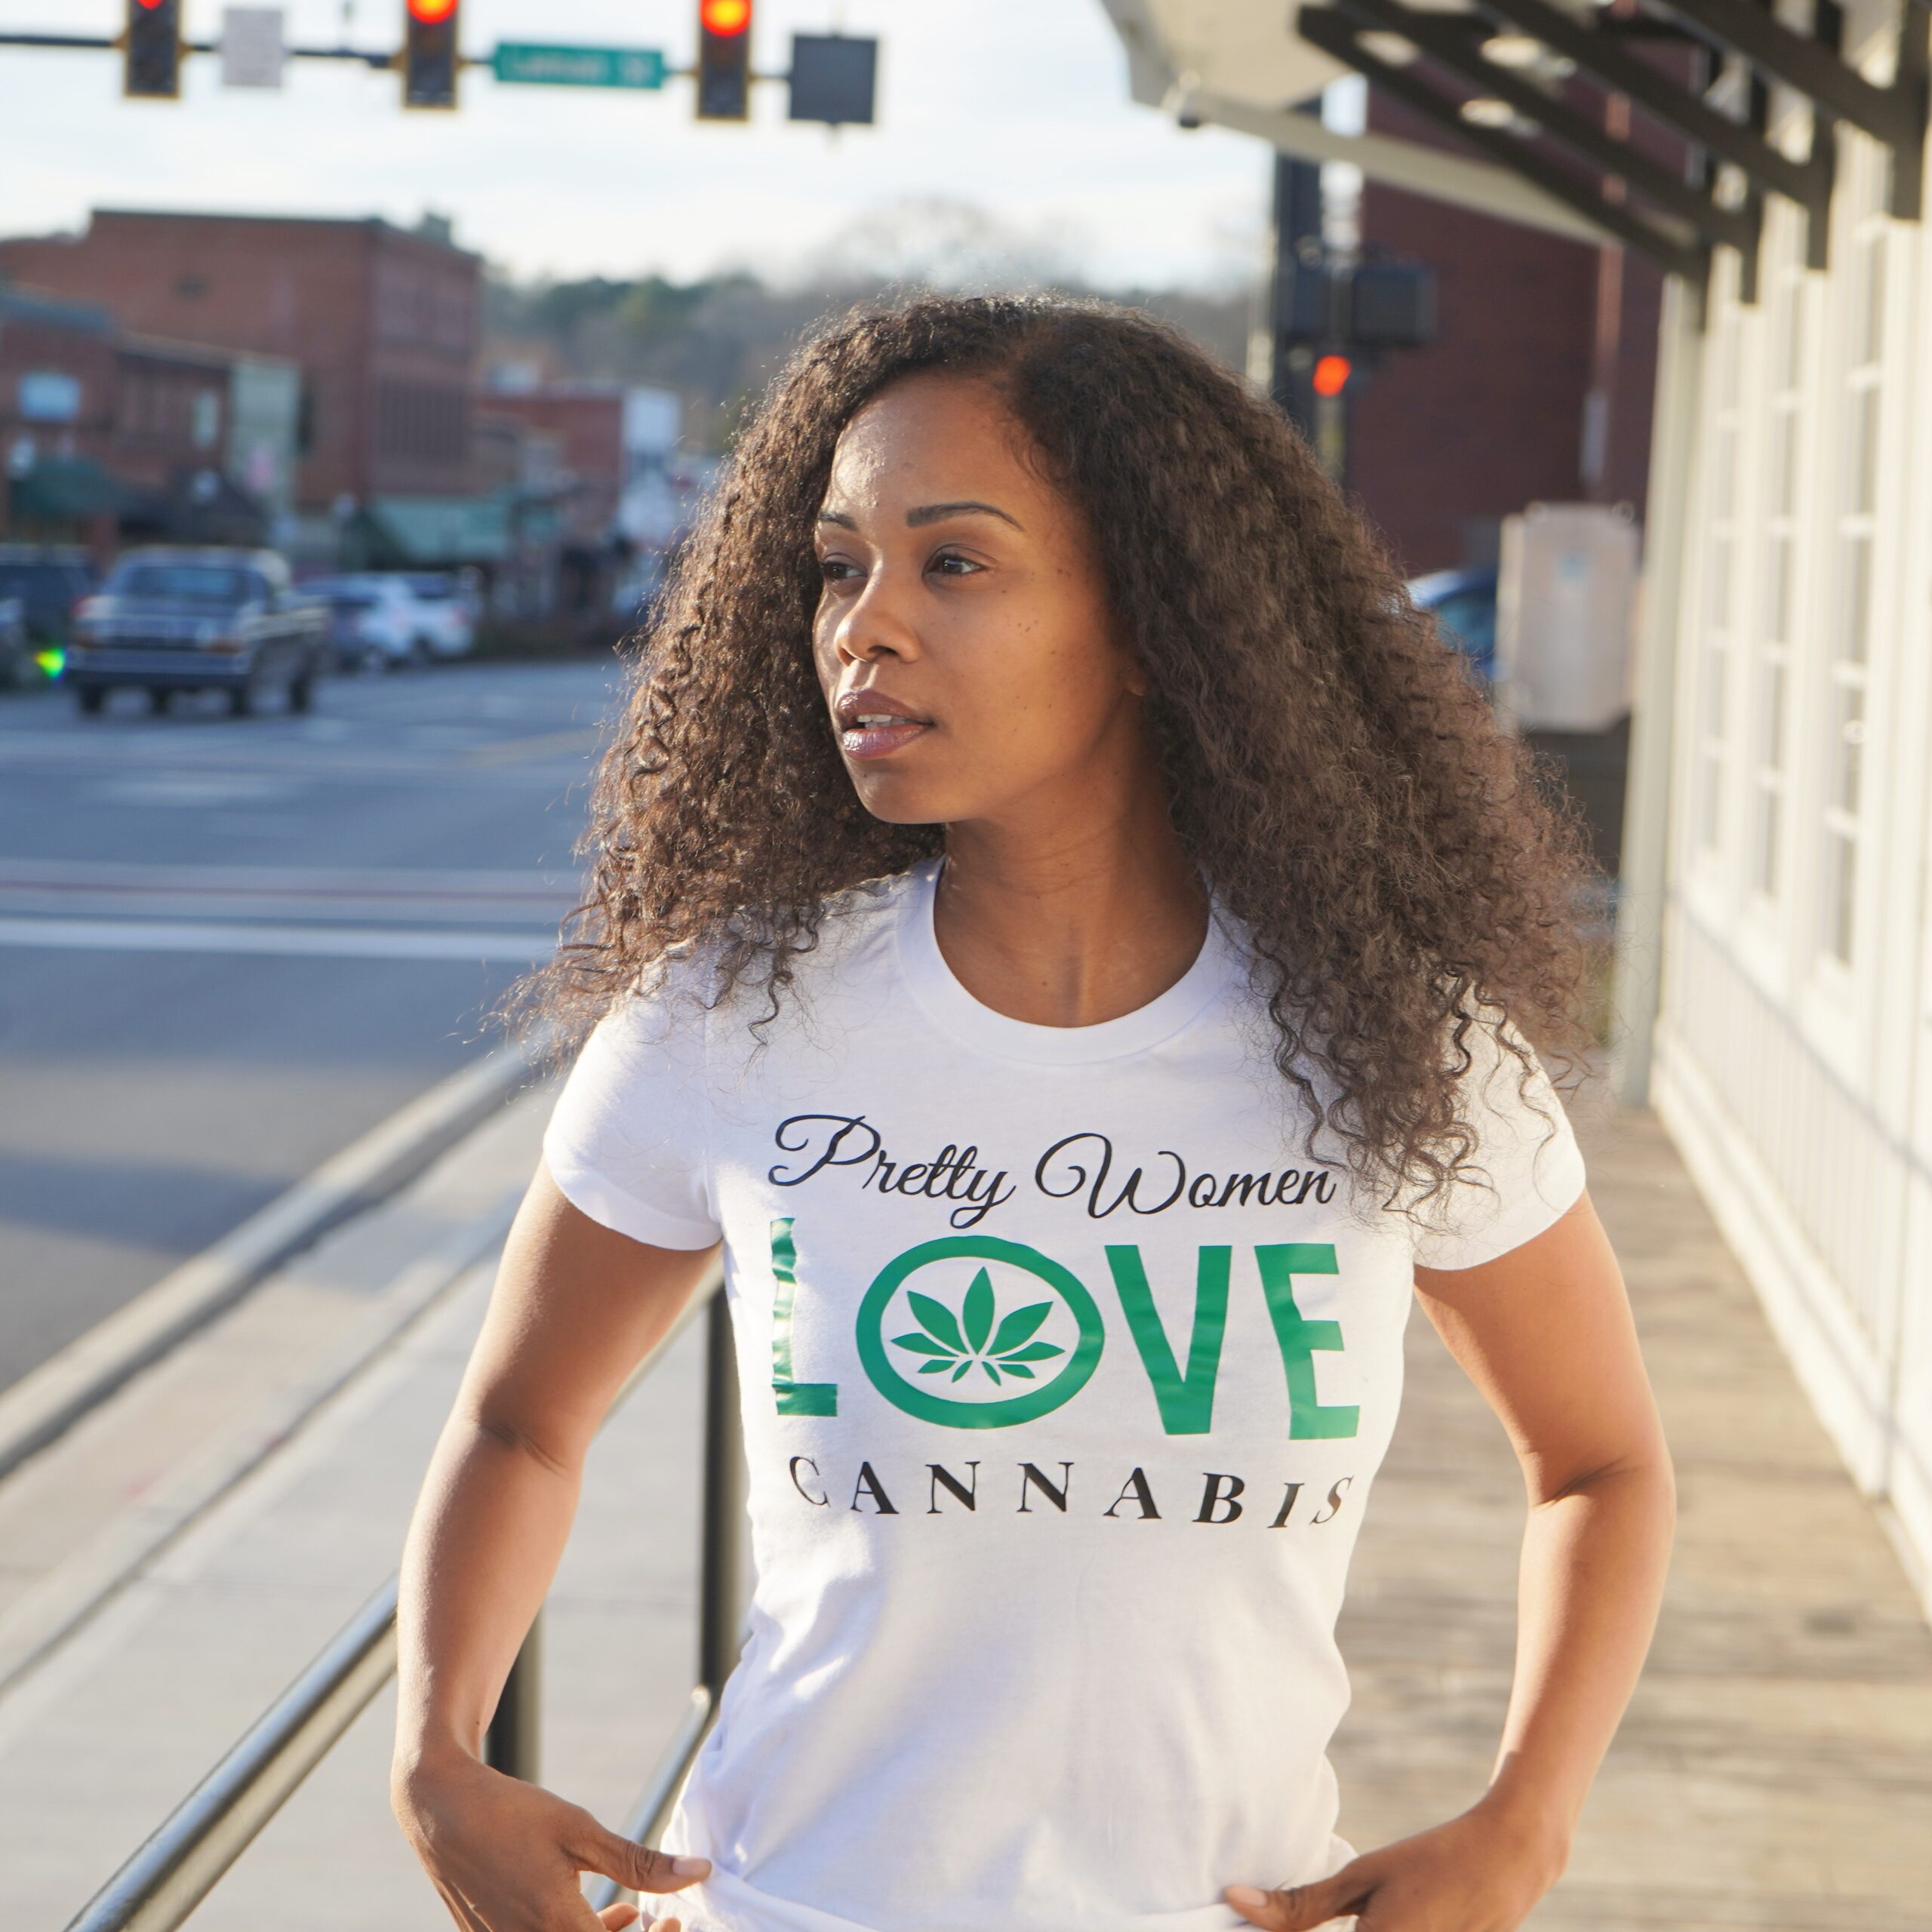 Inspiring Women to Come out of the Cannabis Closet